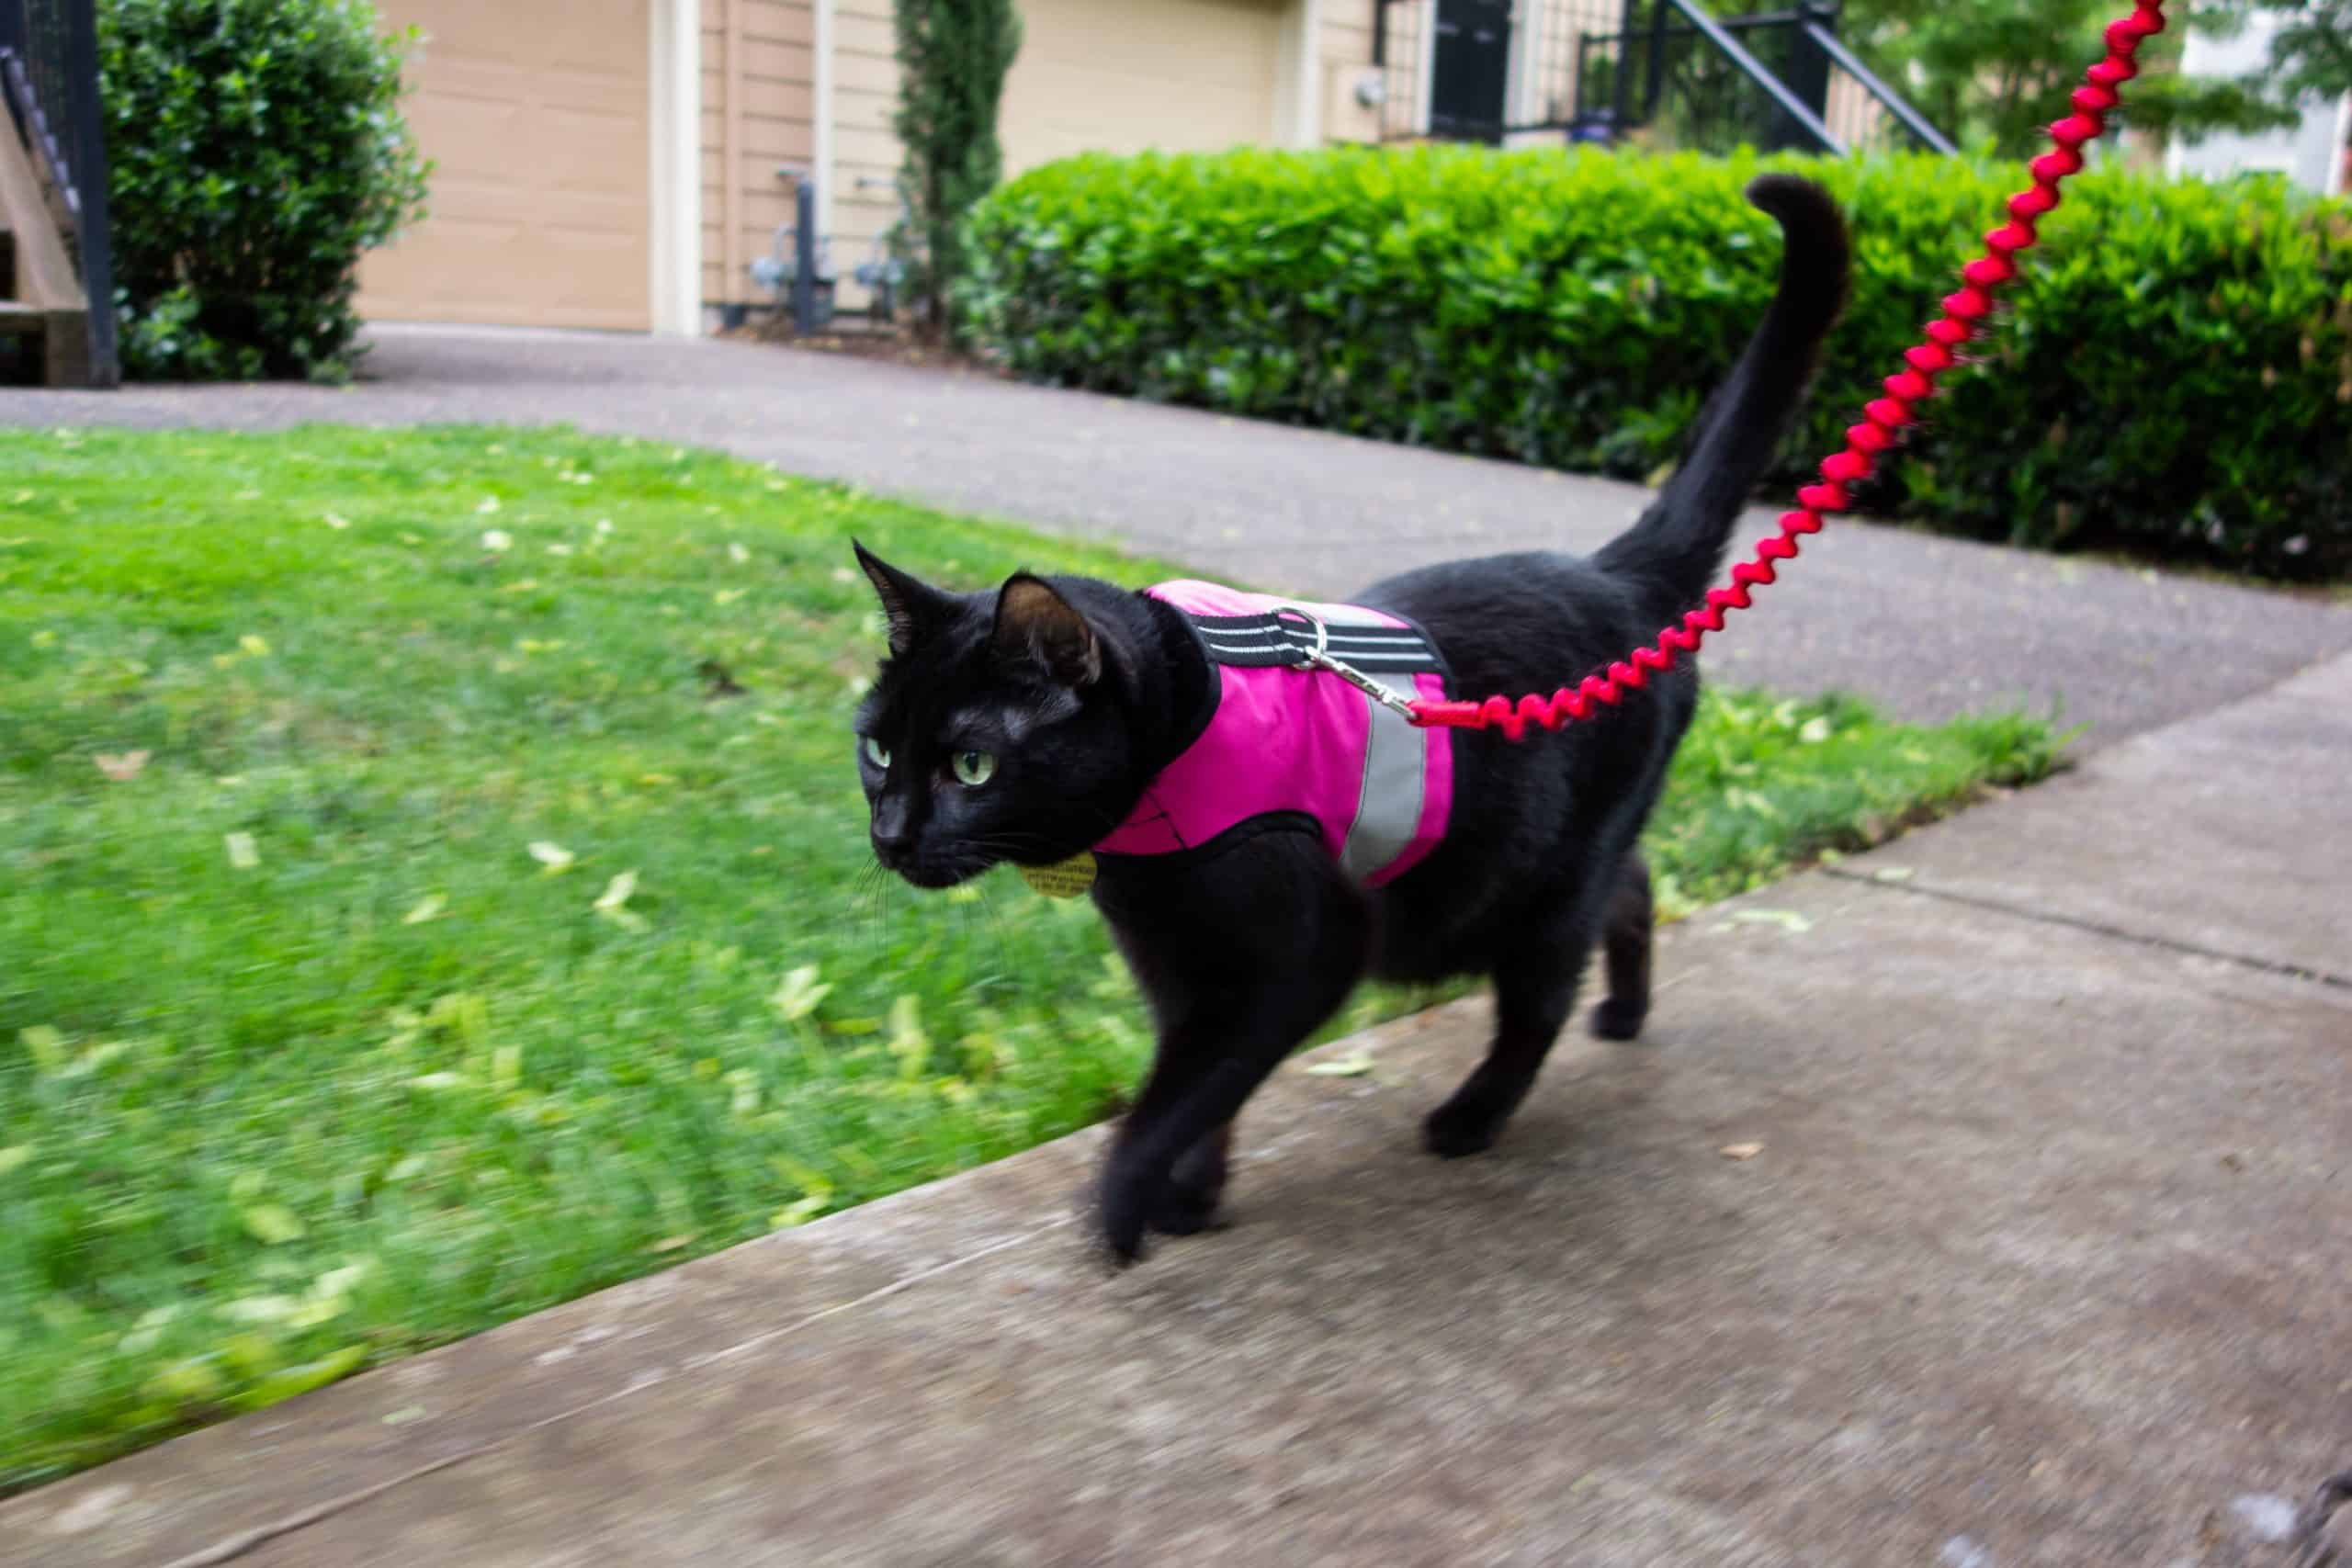 A black cat on a leash wearing a pink vest harness, quickly walking down a sidewalk